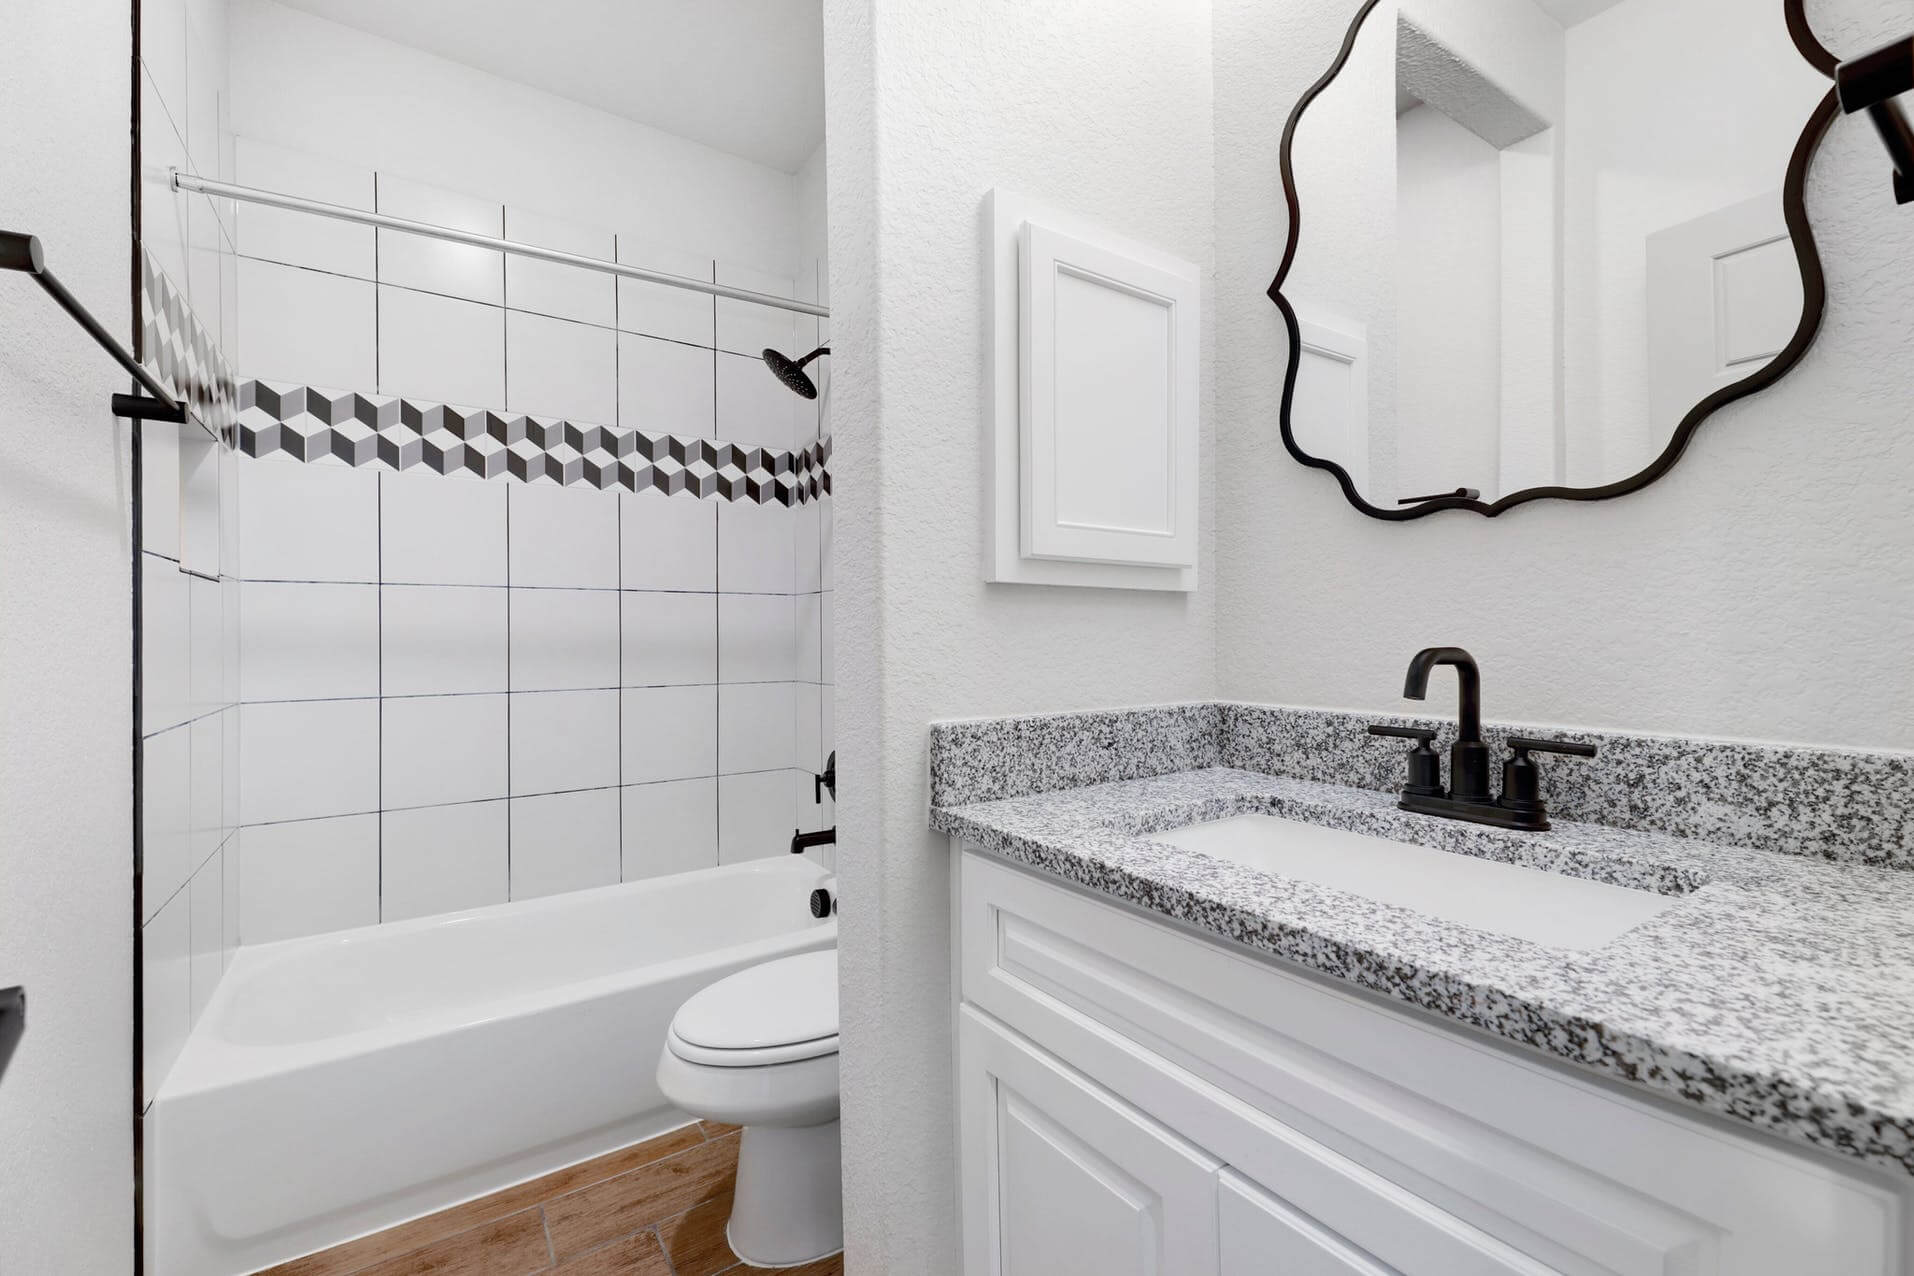 A bathroom with black and white tile and a mirror.